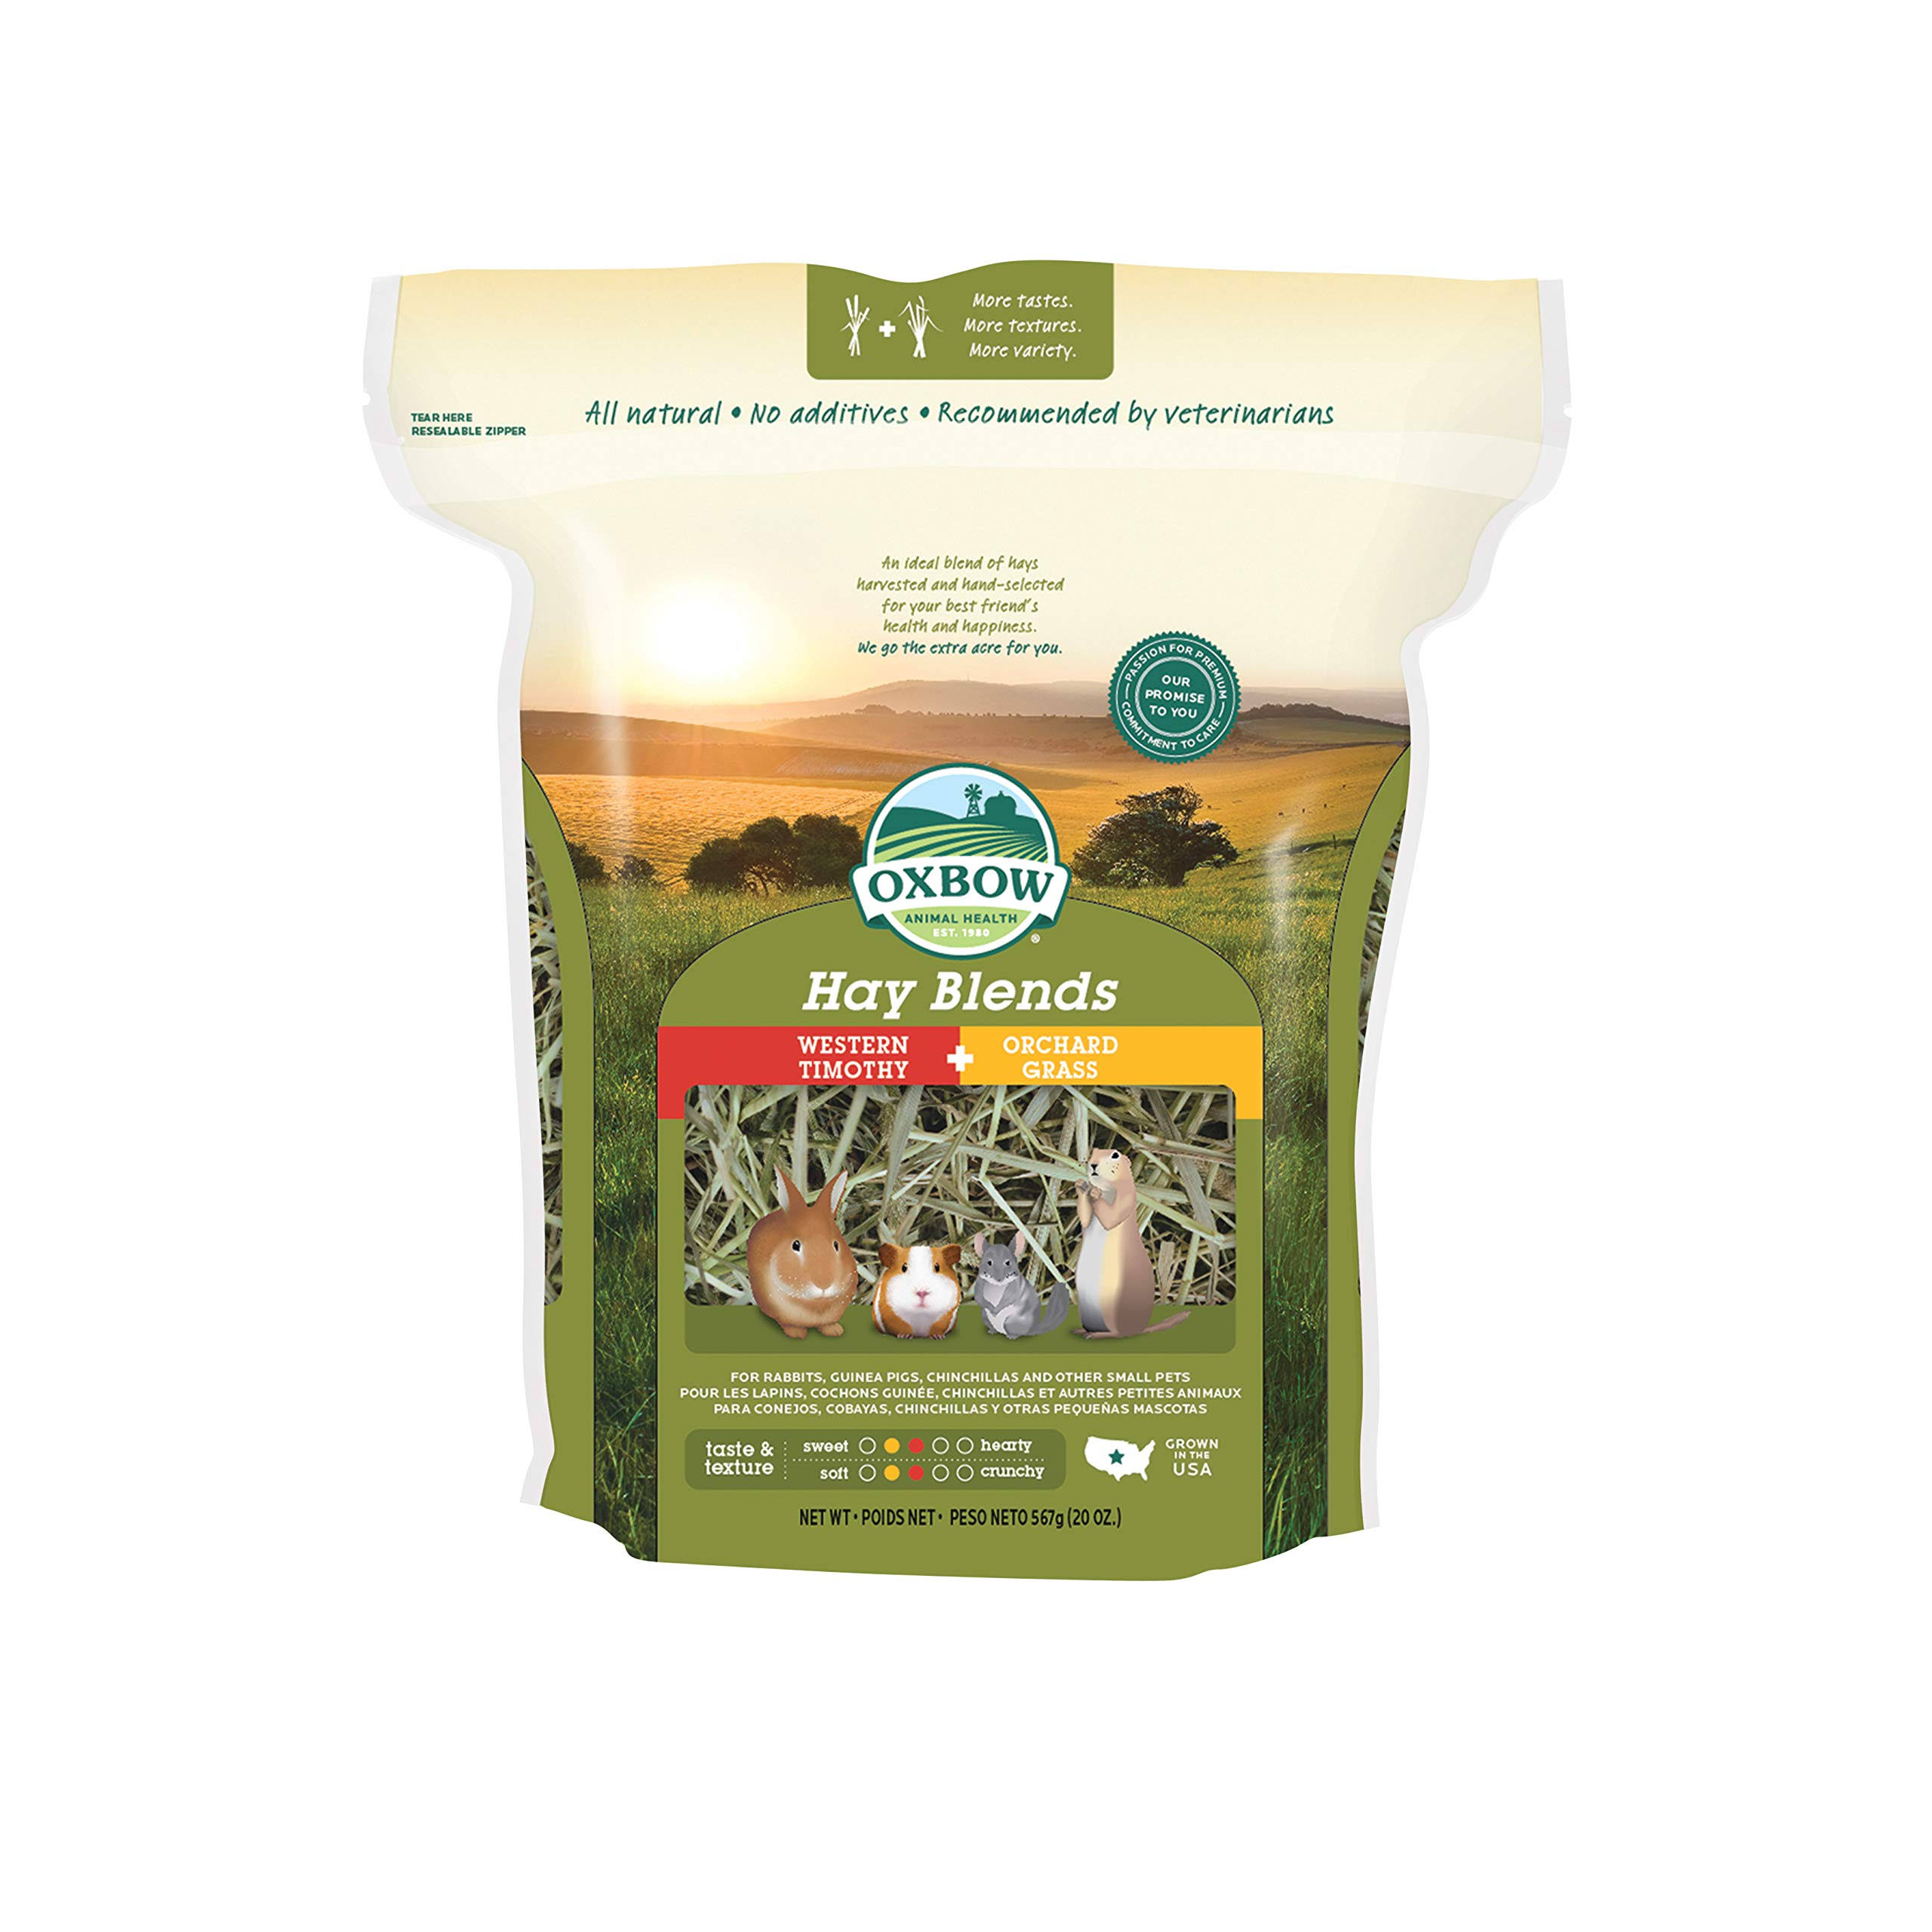 Oxbow Hay Blends - Timothy / Orchard - 20 oz